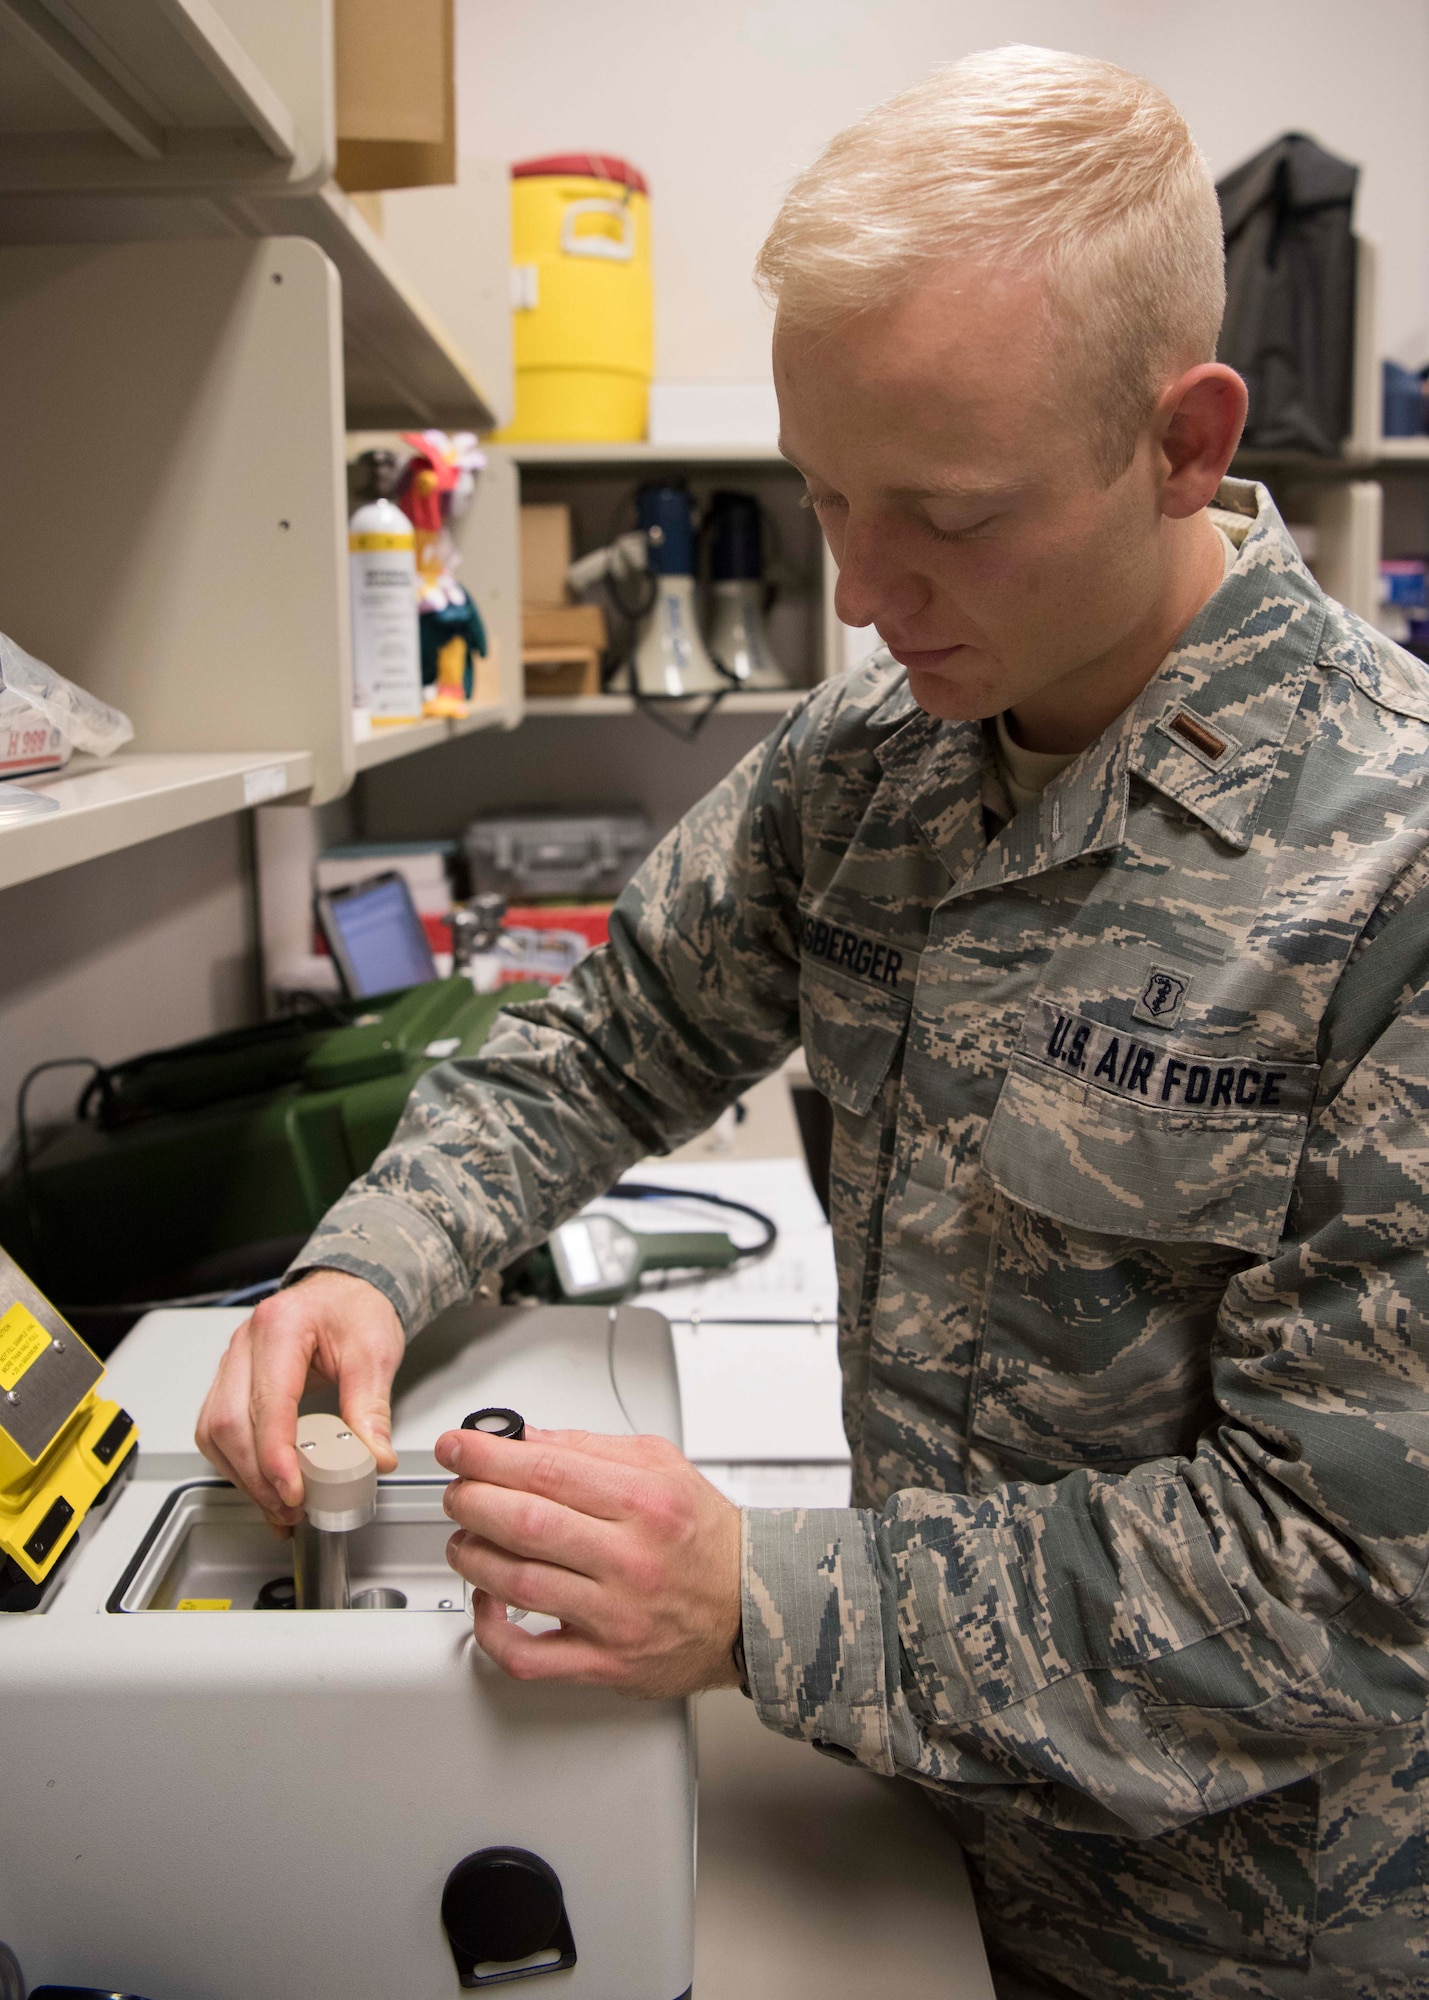 2nd Lt. Connor Mansberger, 49th Medical Group Bioenvironmental Engineering chief of operations, inserts a sample vile into a HAPSITE chemical identification system, Jan. 11, 2019, on Holloman Air Force Base, N.M. The HAPSITE analyzes the components of liquid and air samples, and bioenvironmental engineers use the device to detect industrial contaminants during work center inspections. (U.S. Air Force photo by Staff Sgt. BreeAnn Sachs)